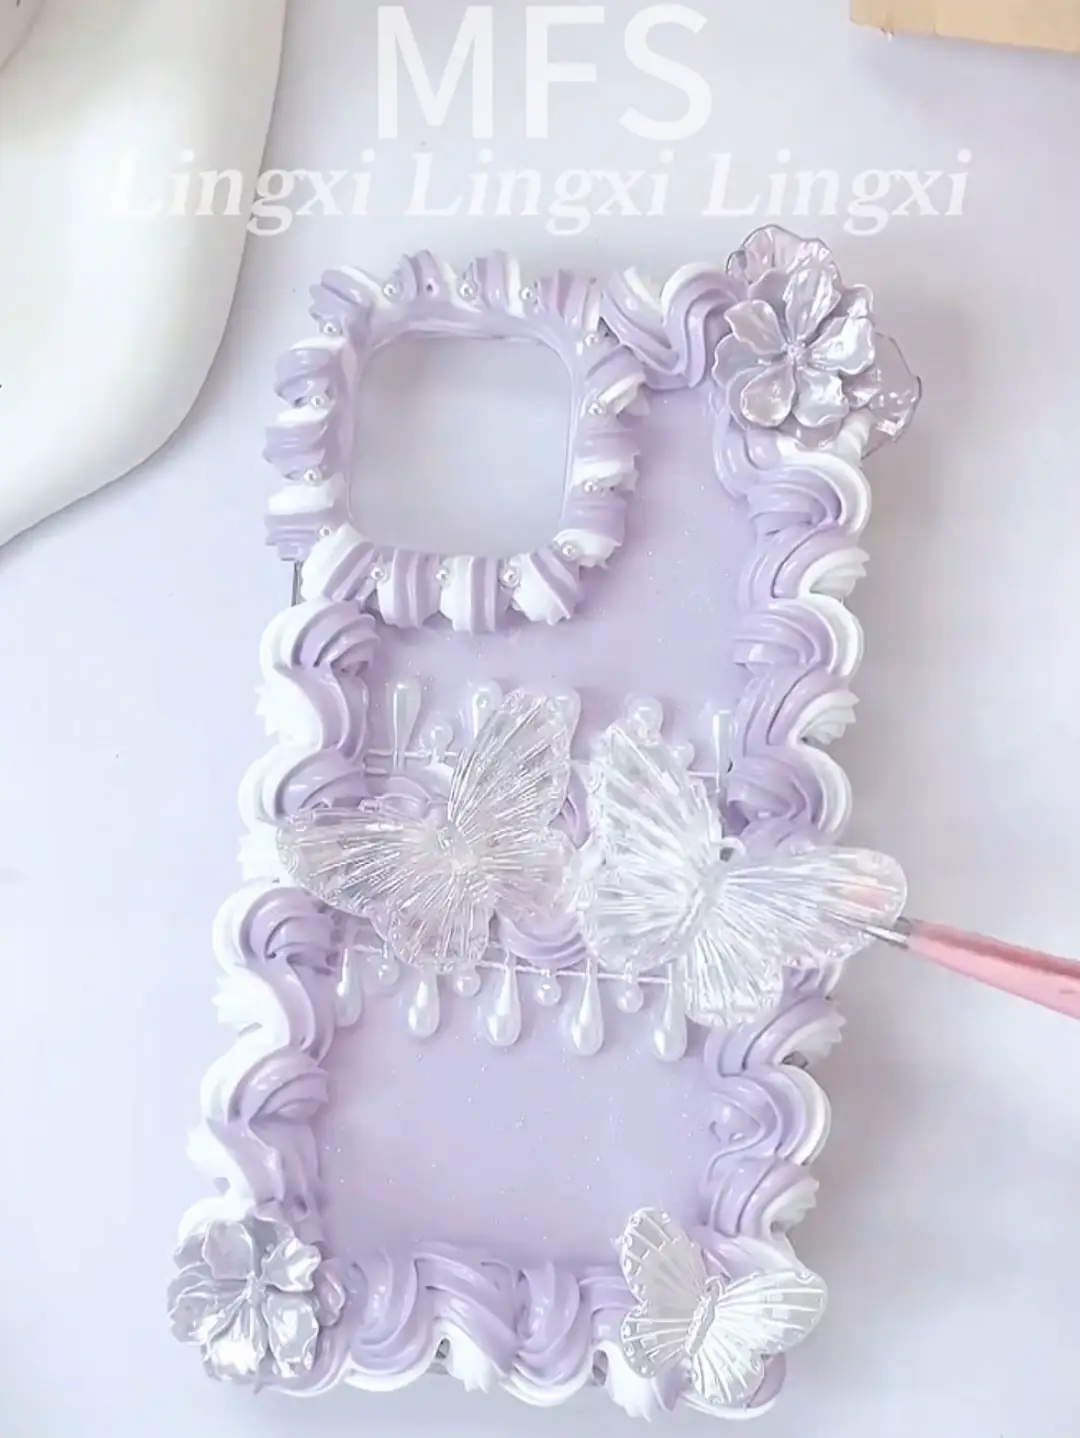 How to Color Whip for Decoden Tutorial + Watch Me Whip 3DS Case